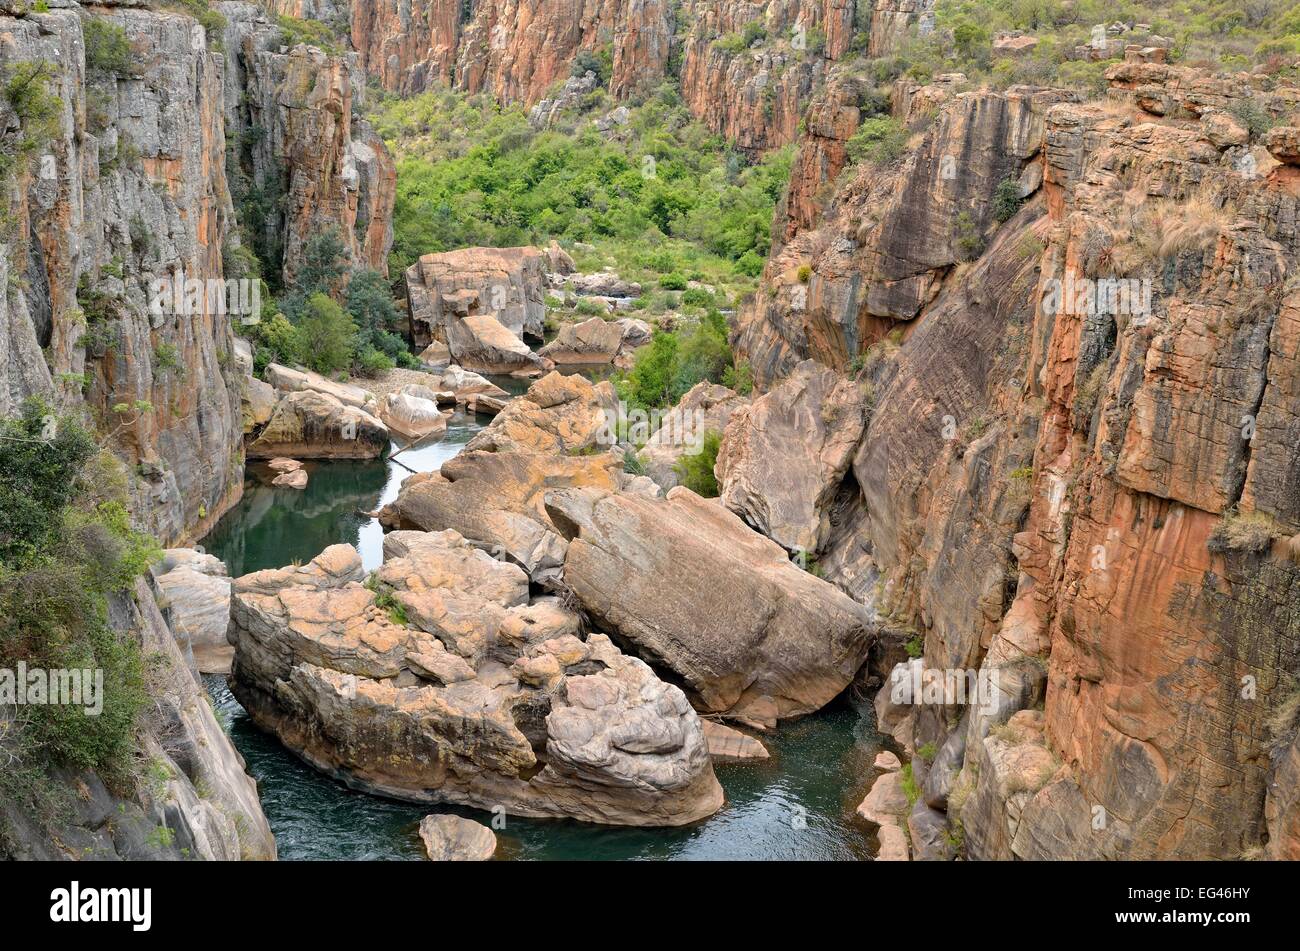 Bourke's Luck Potholes, rock formation in dolomite rock, Blyde River Canyon Nature Reserve, Mpumalanga, South Africa Stock Photo